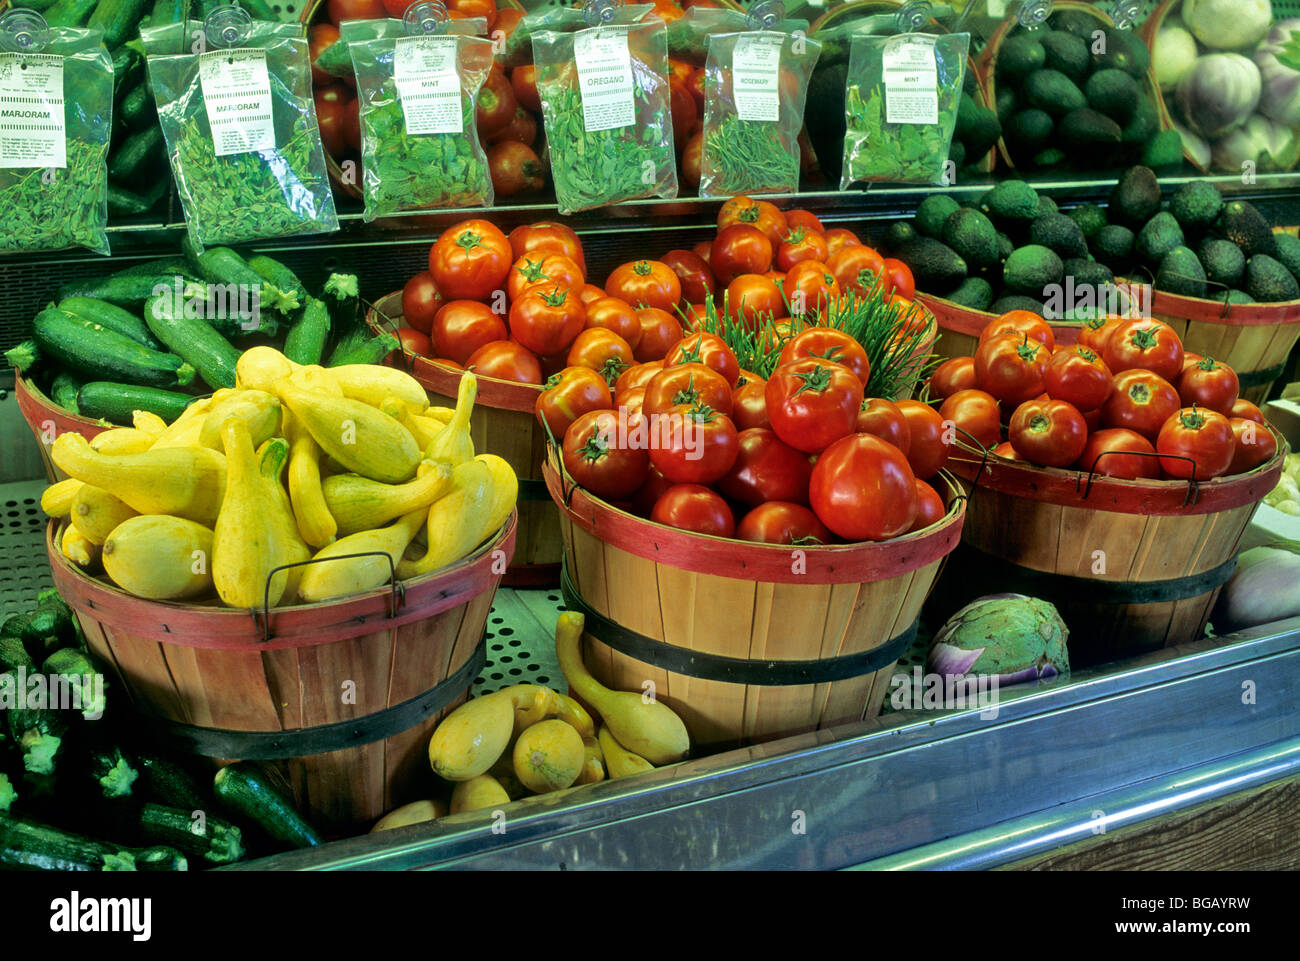 Fresh vegetables at produce stand, California Stock Photo